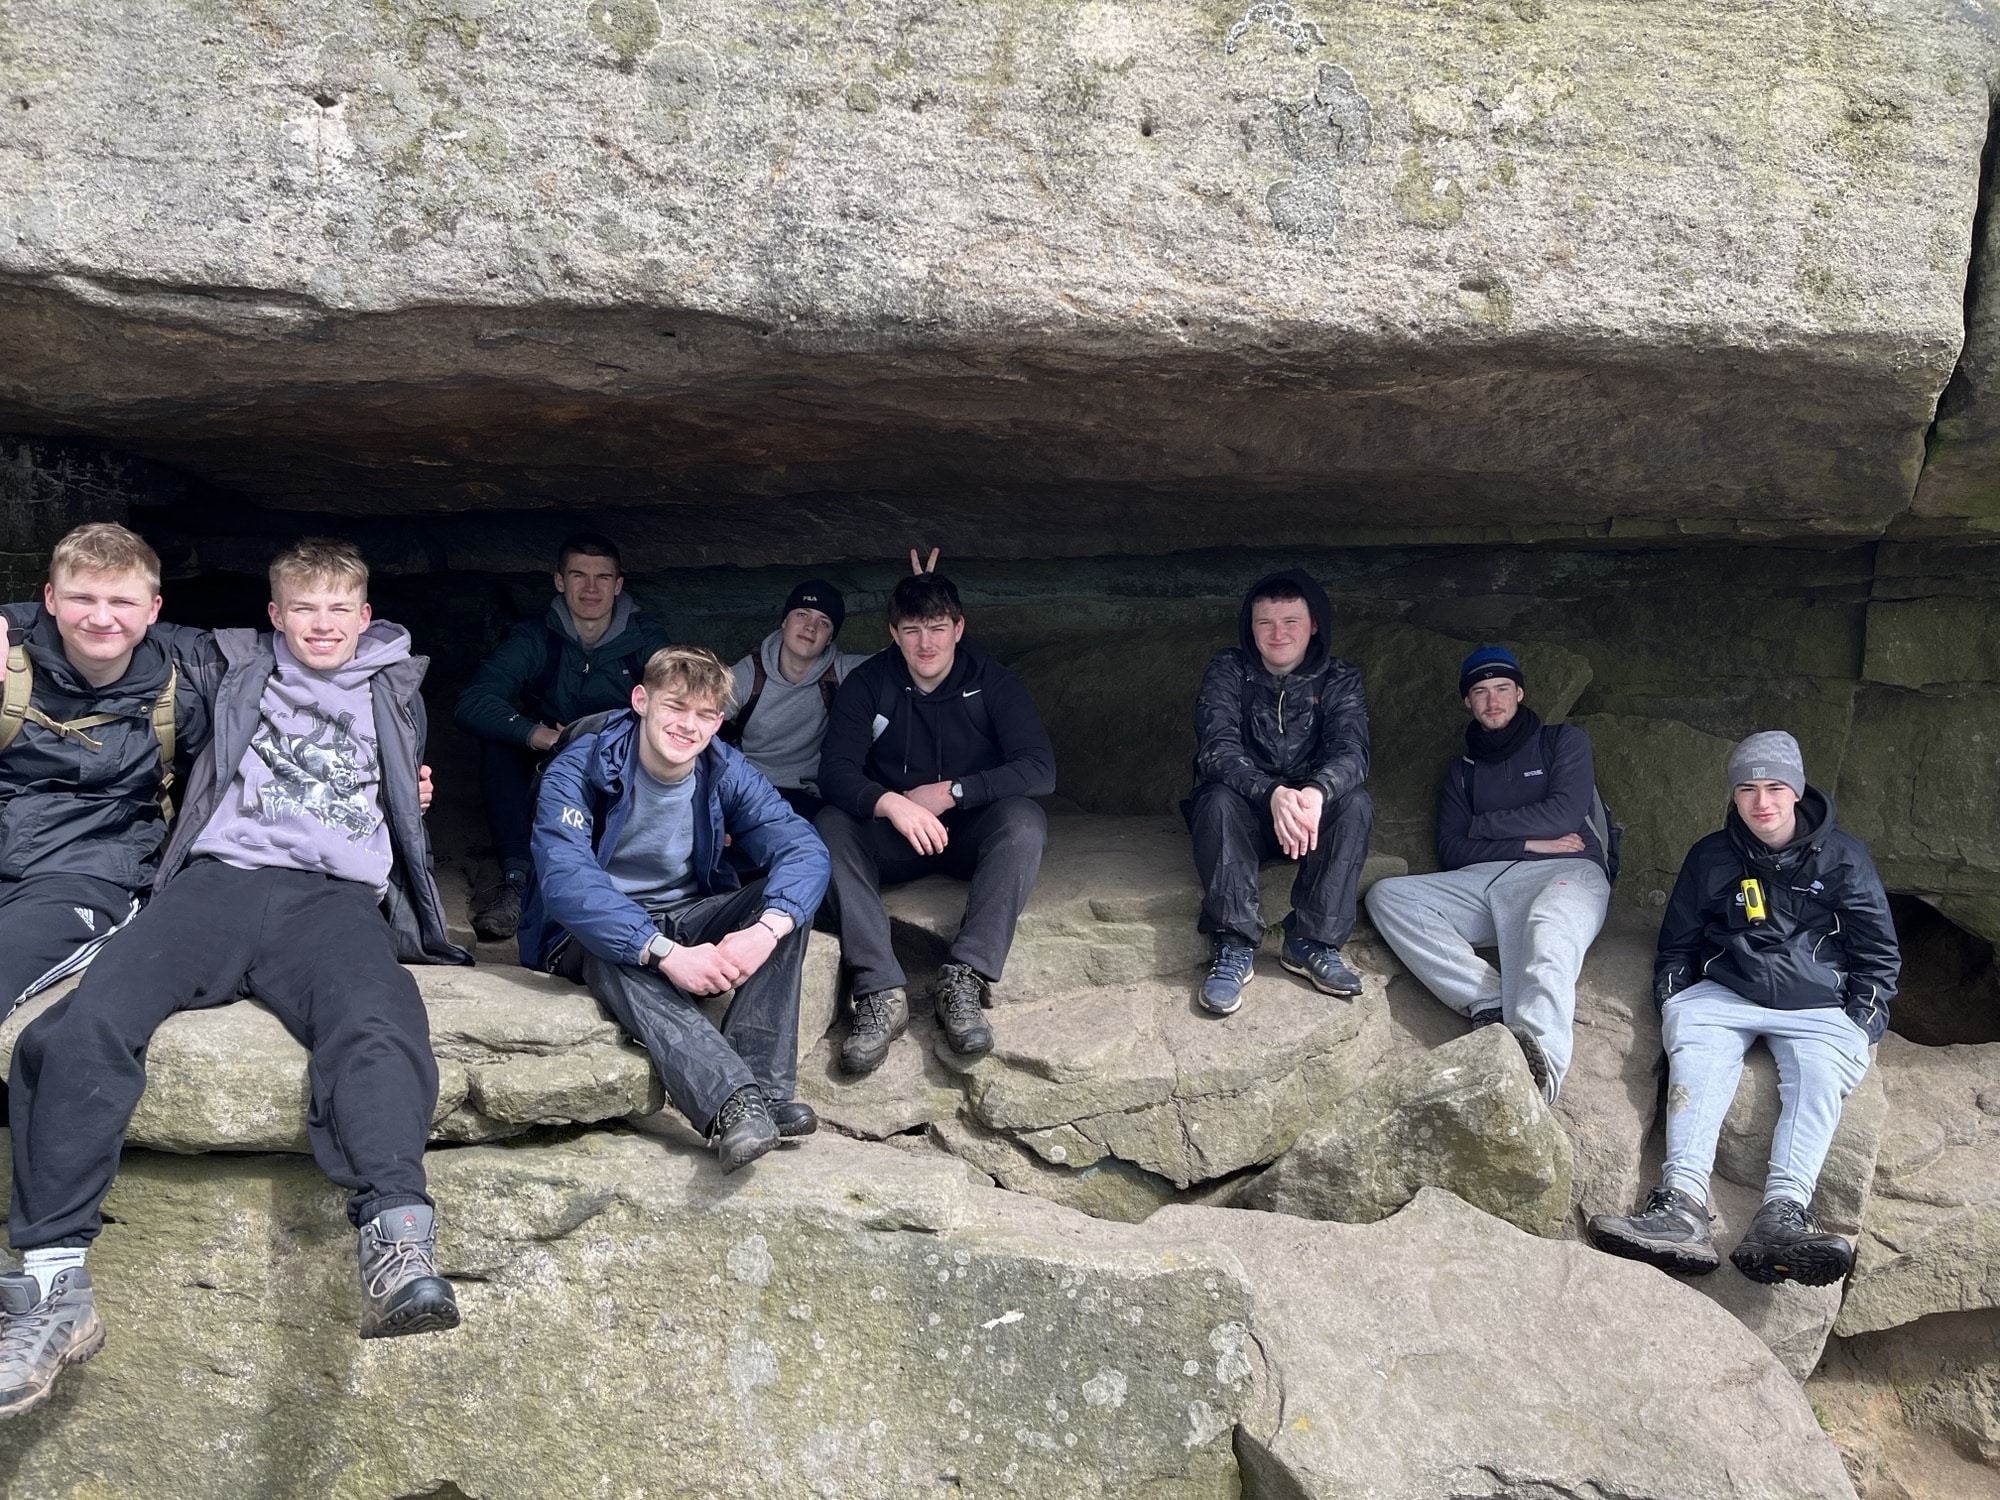 UPS students take part in Peak District challenge - Students resting after exploring place